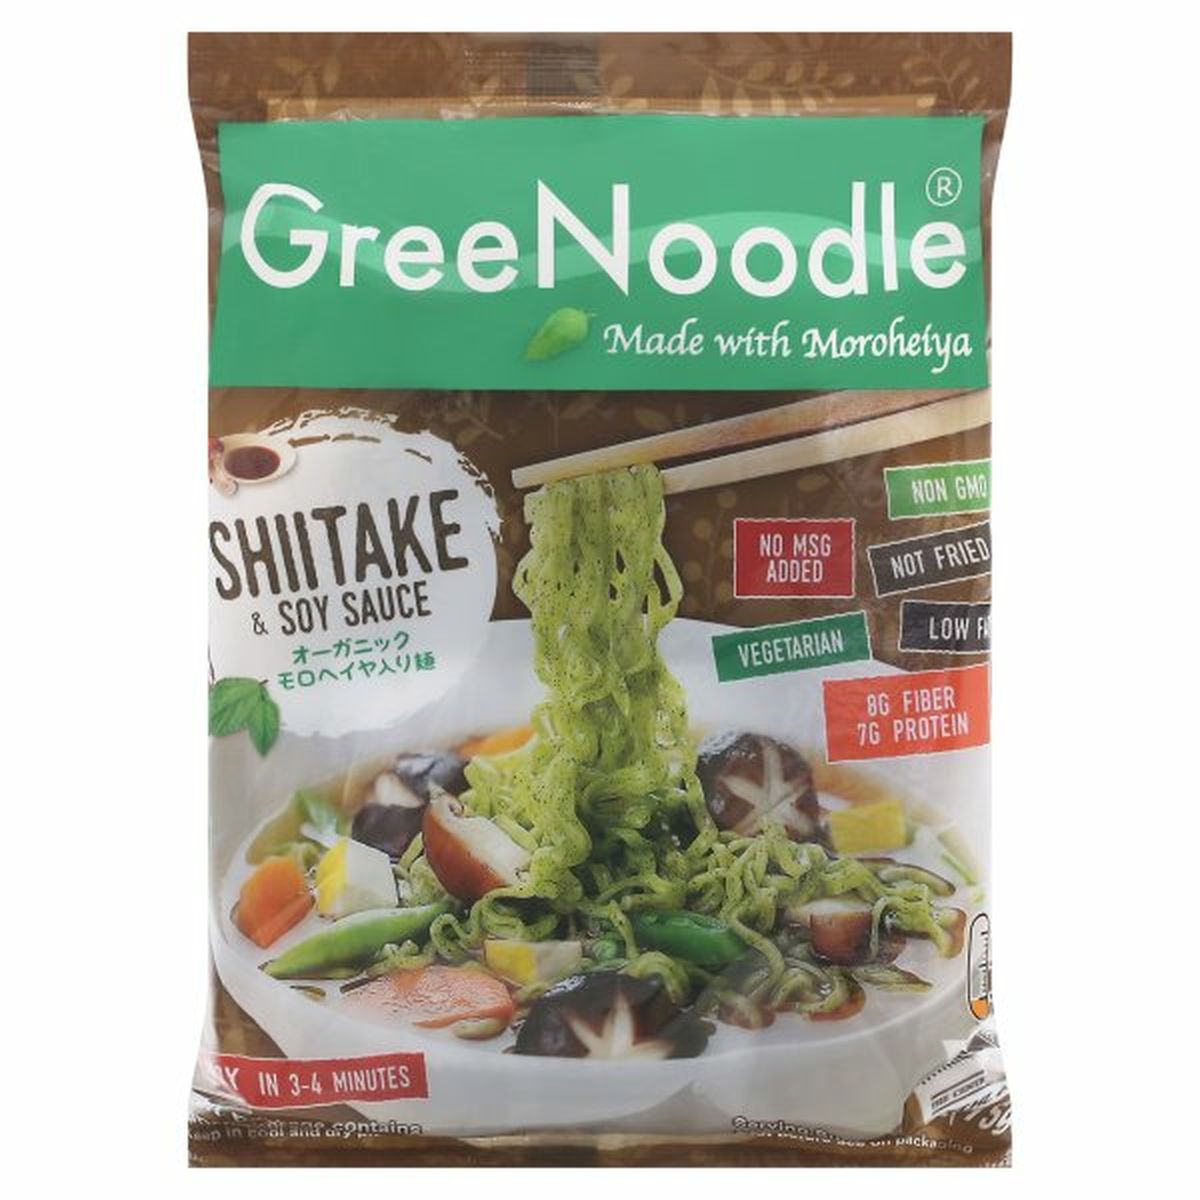 Calories in GreeNoodle Noodles, Shiitake & Soy Sauce